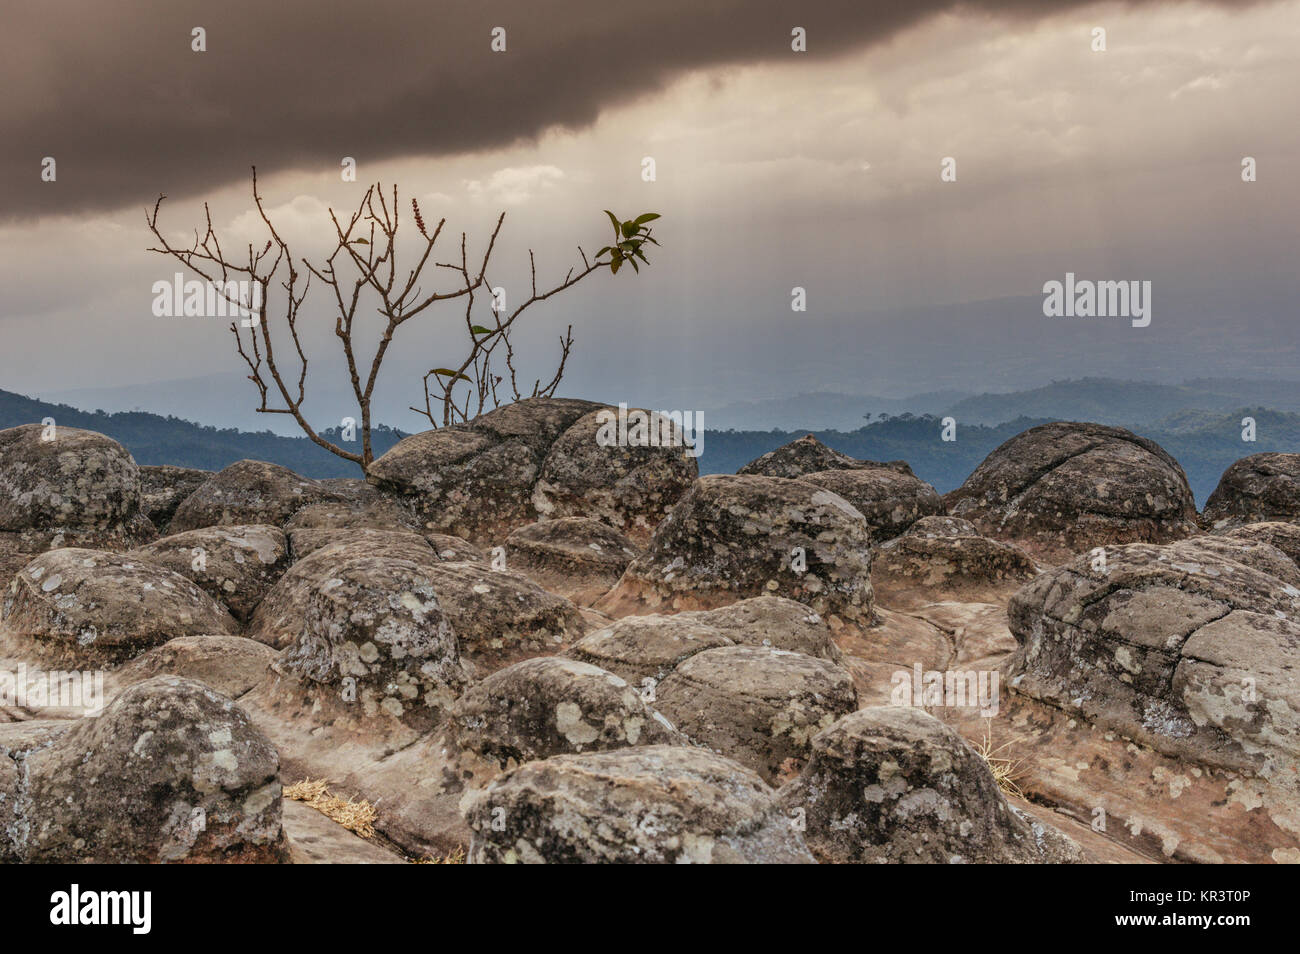 dark and ominous clouds sweeping across the plains seen from the top of a mountain in Phu Ruea national park, Thailand Stock Photo